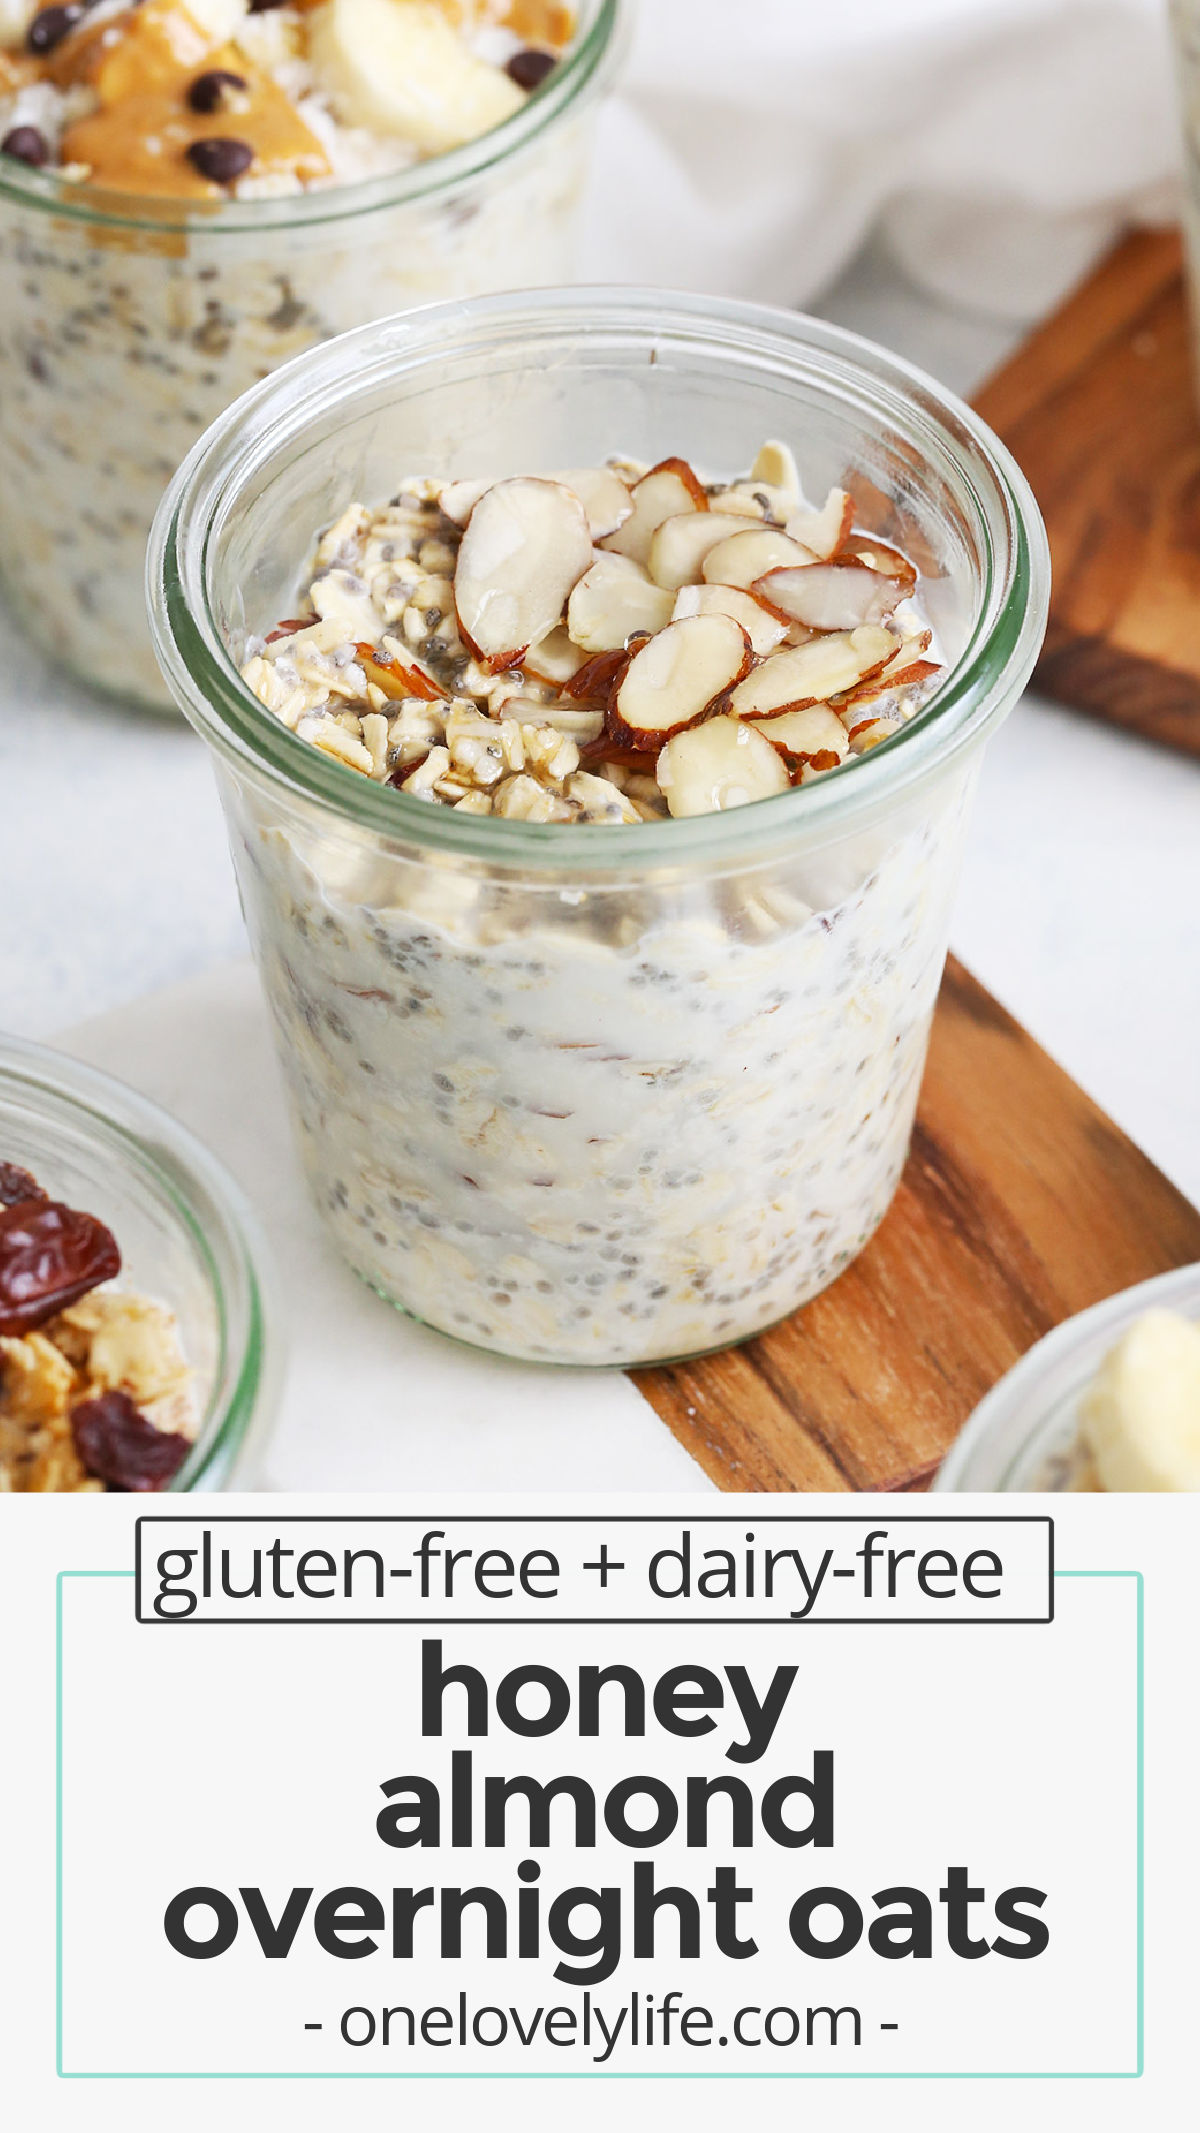 Honey Almond Overnight Oats - Creamy overnight oats studded with crunchy almonds and a kiss of honey. This is one delicious meal prep breakfast!  (Gluten-free) // Meal Prep Breakfast // Almond Overnight Oats // Healthy Breakfast // Honey almond overnight oatmeal // honey overnight oats // easy almond overnight oats